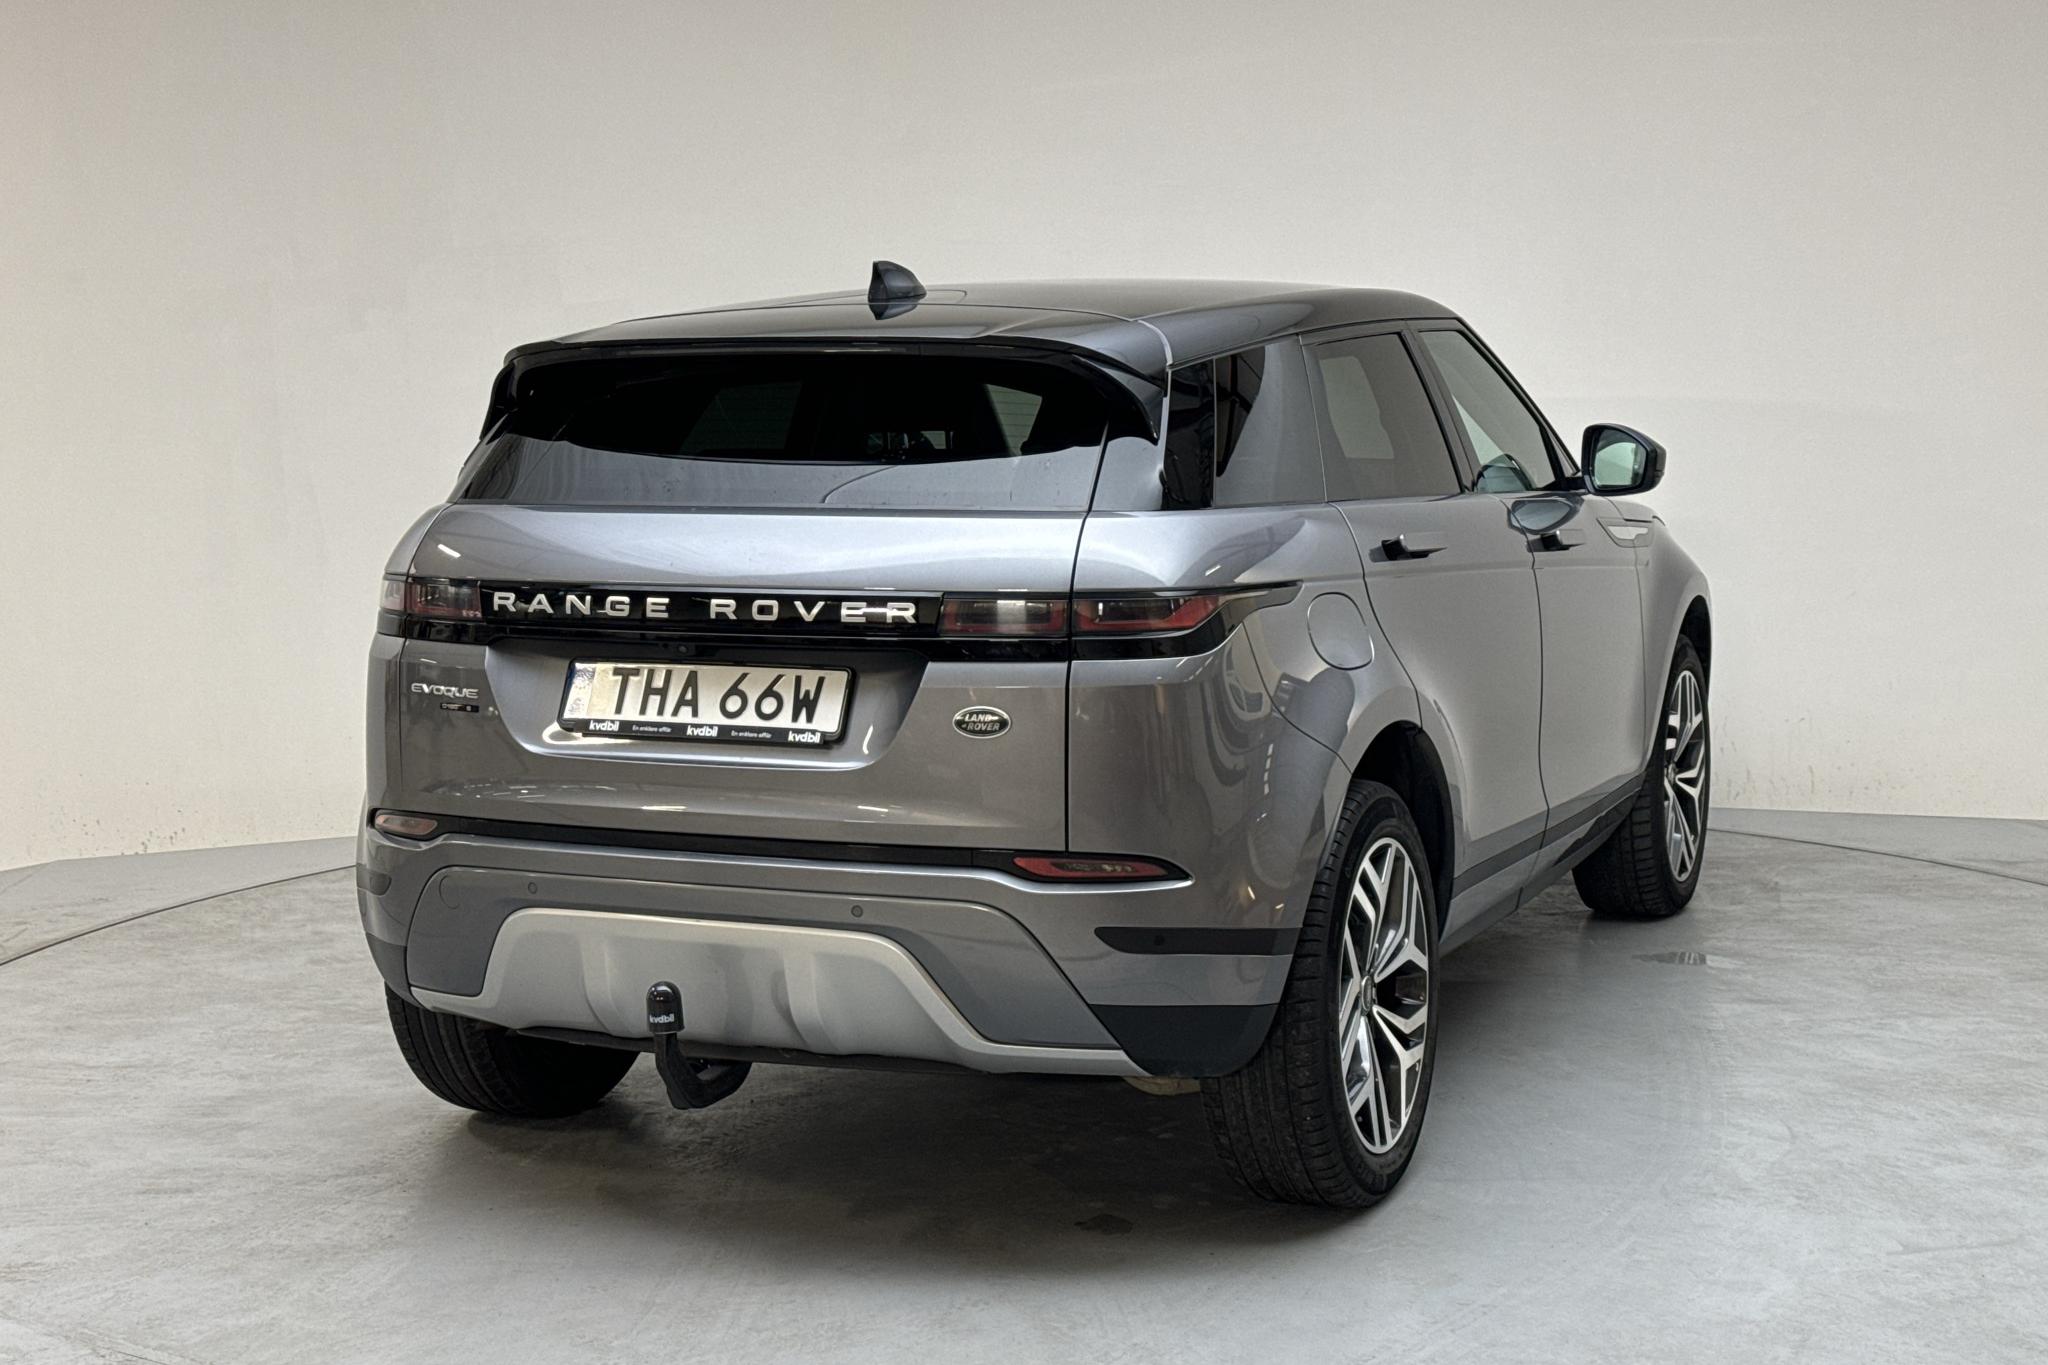 Land Rover Range Rover Evoque 2.0 D180 AWD 5dr (180hk) - 96 600 km - Automatic - gray - 2020